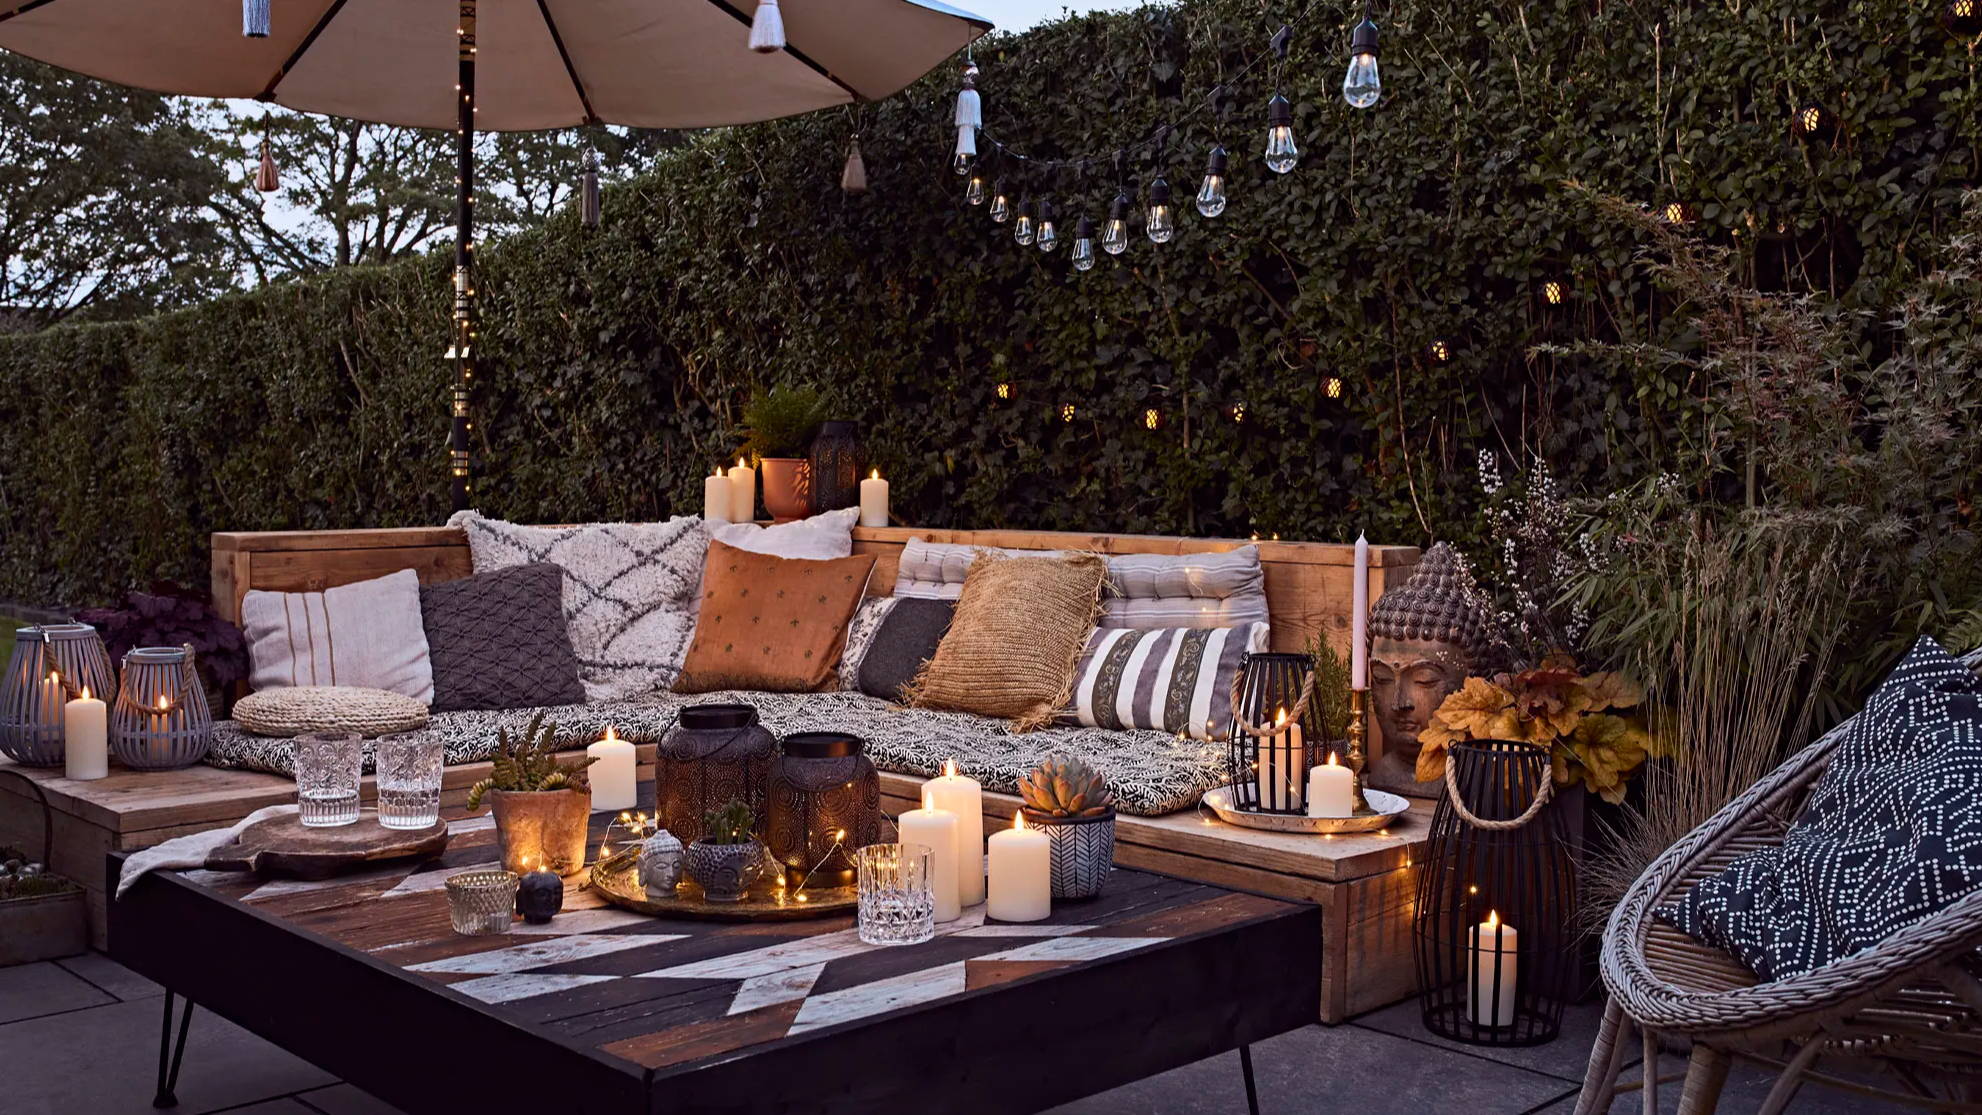 Alfresco table top with TruGlow candles, garden lanterns and festoons illuminated